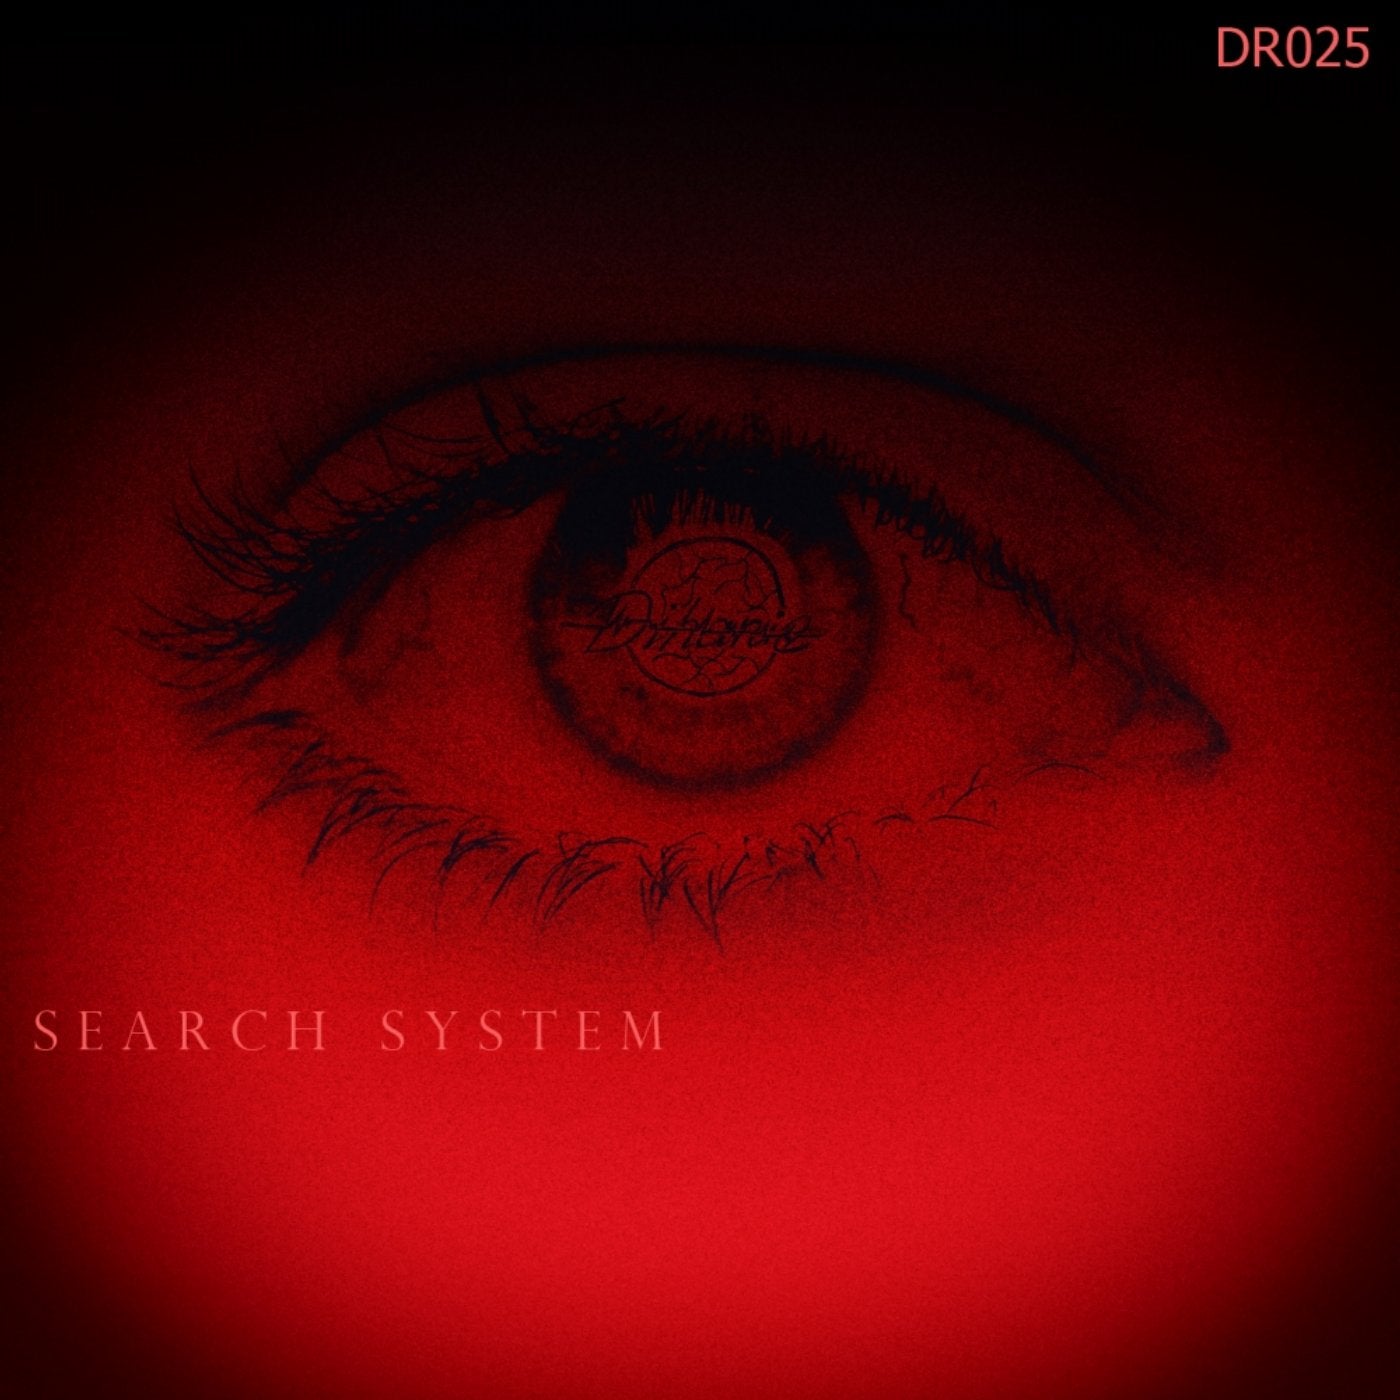 Search System